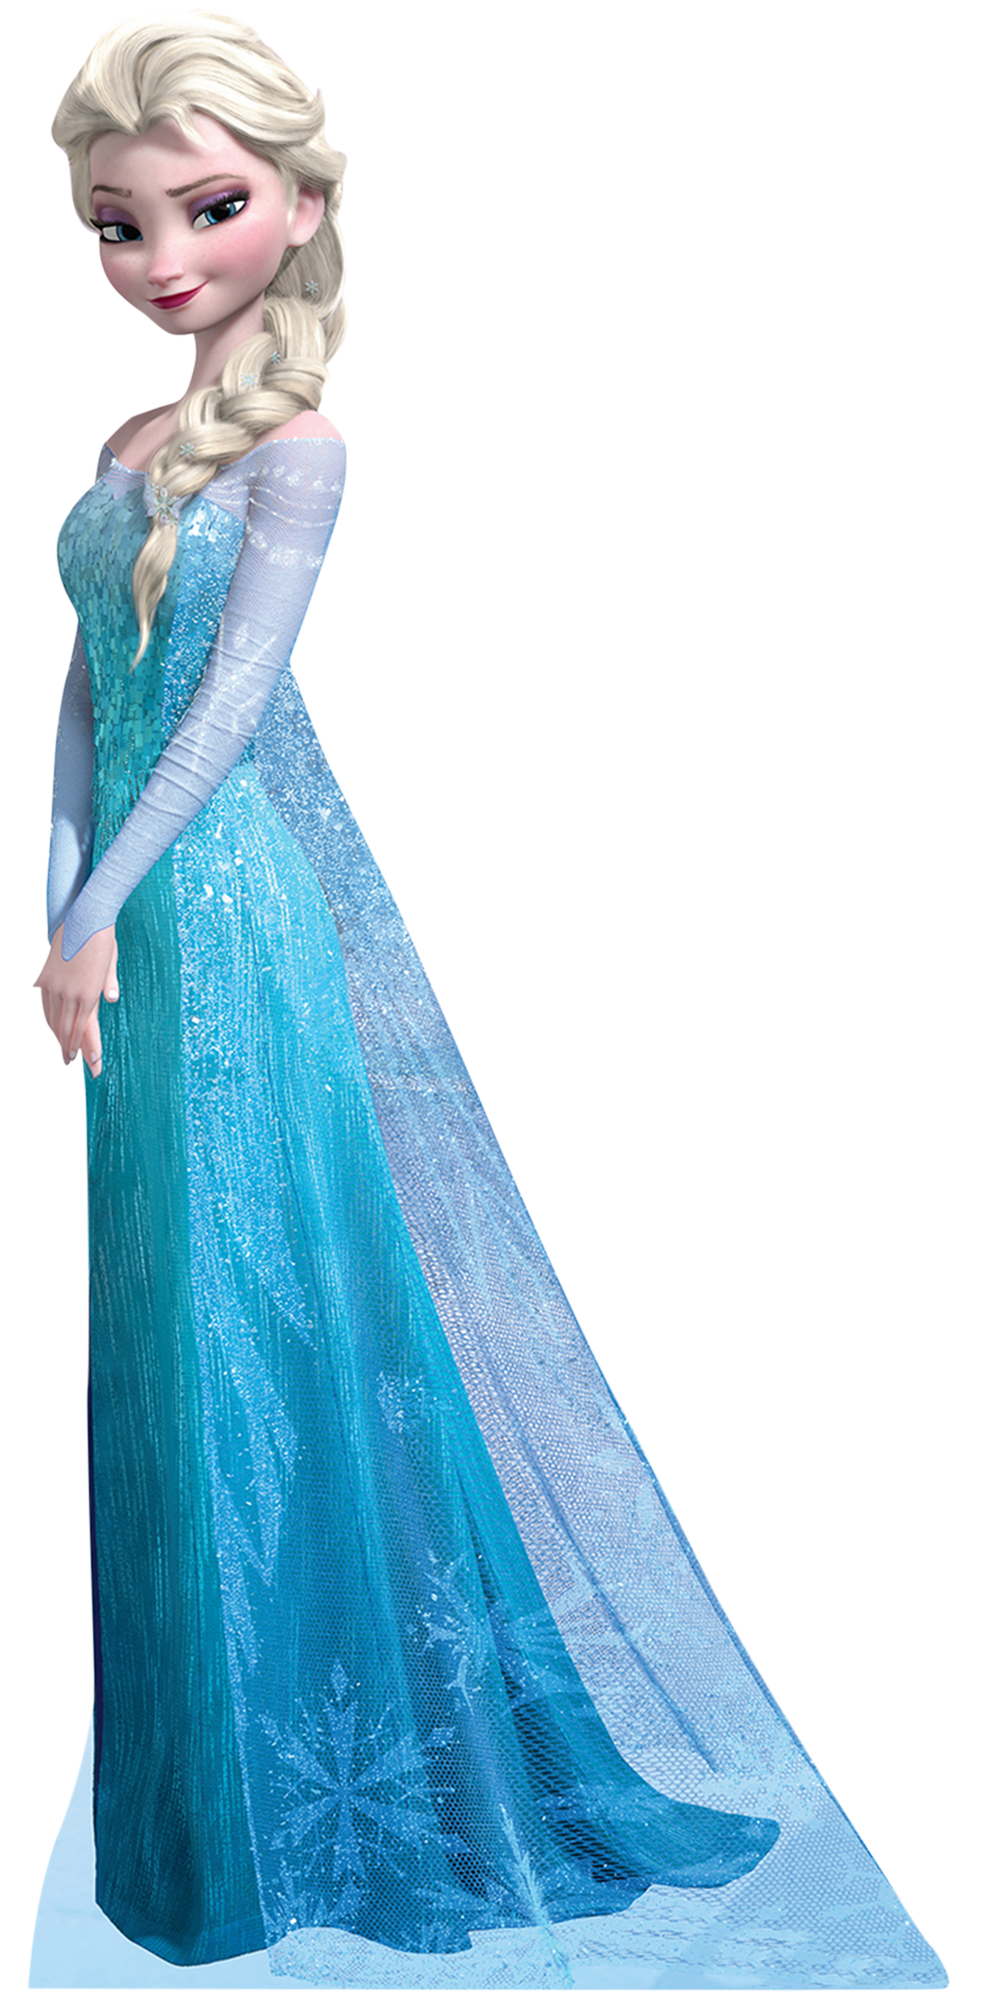 Frozen Free Download Png PNG Image